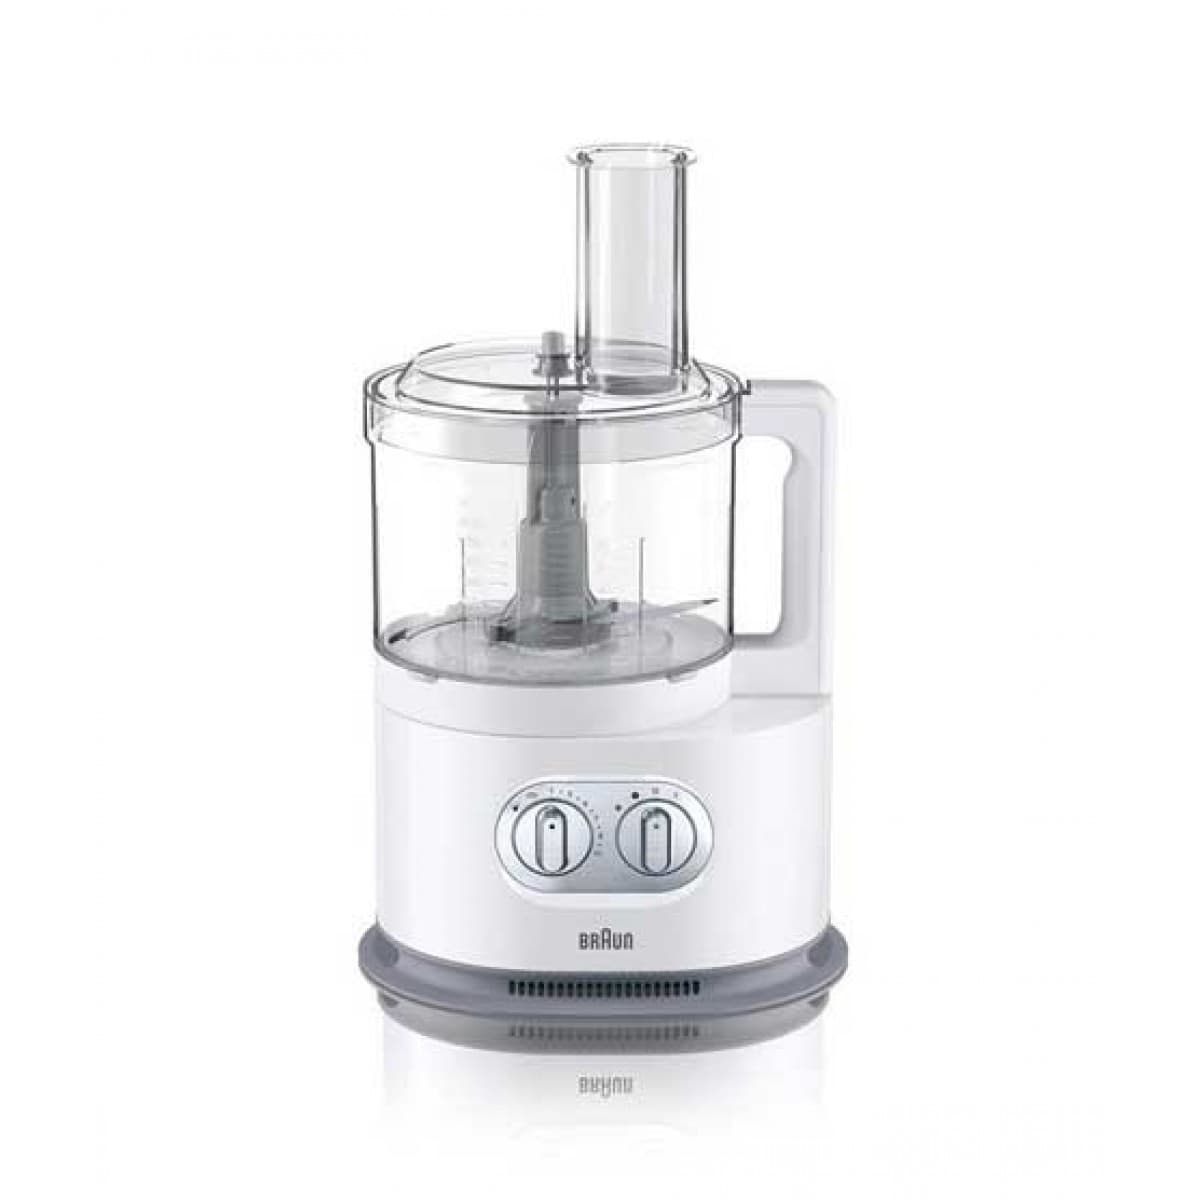 Live those little moments of joy with Braun's FP 3010 Food Processor which  helps you speed up your cooking process. #Braun #BraunHousehold, By  Braun Household Pakistan